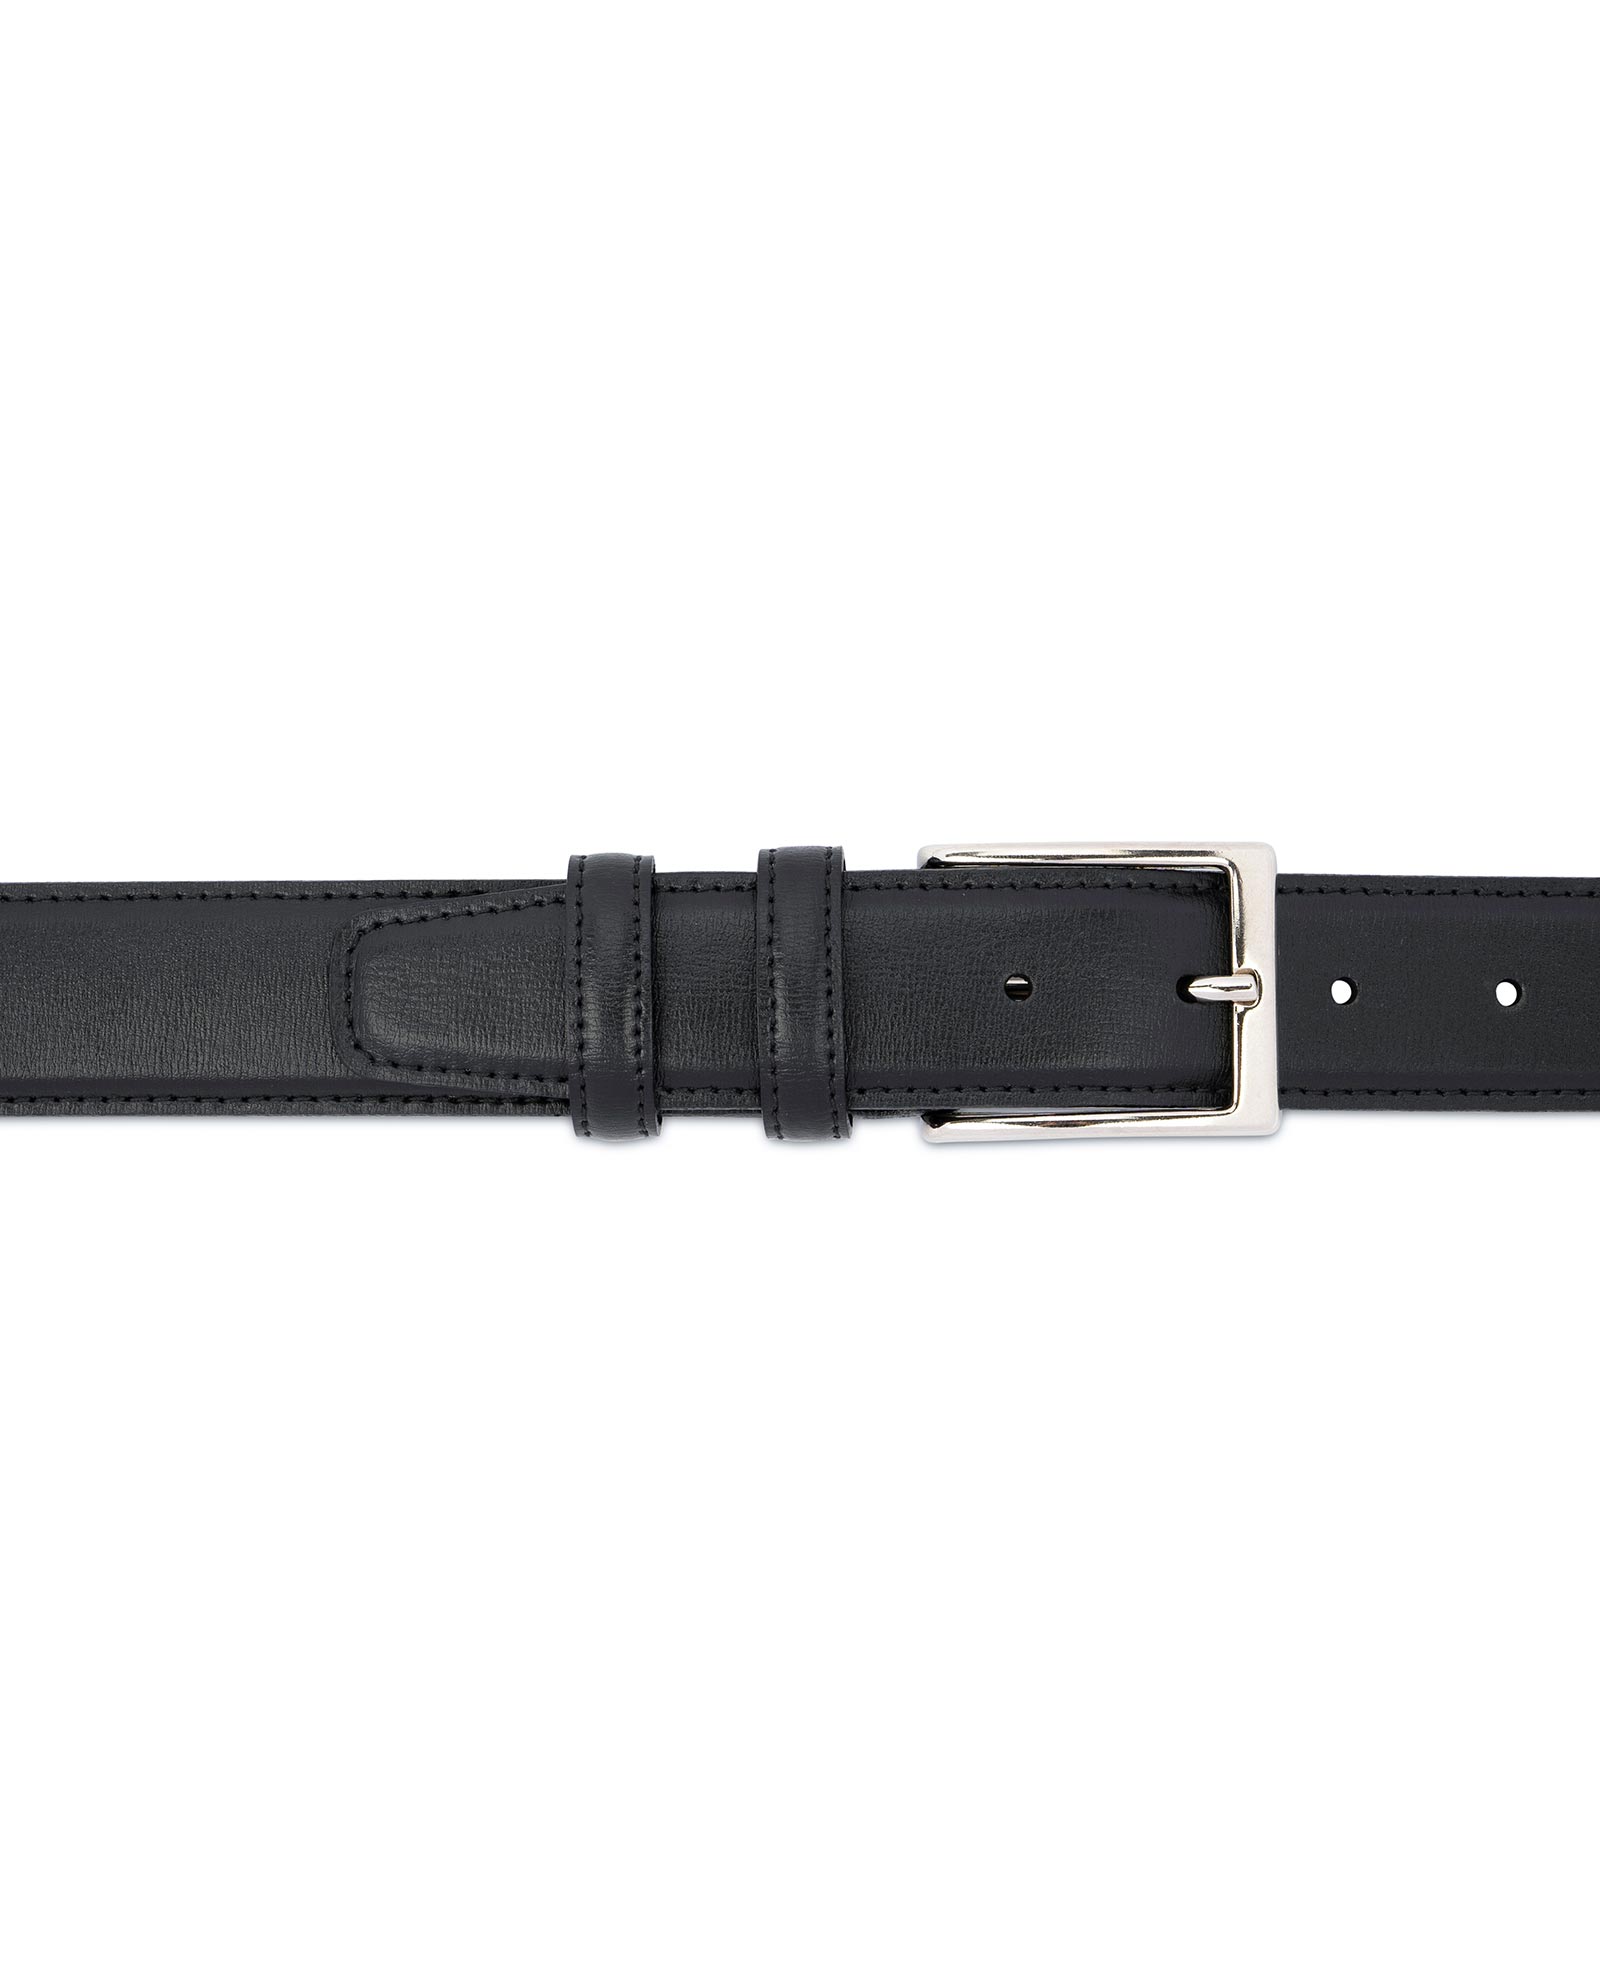 Buy Gifts For Male Coworkers | Black Dress Belt | Capo Pelle